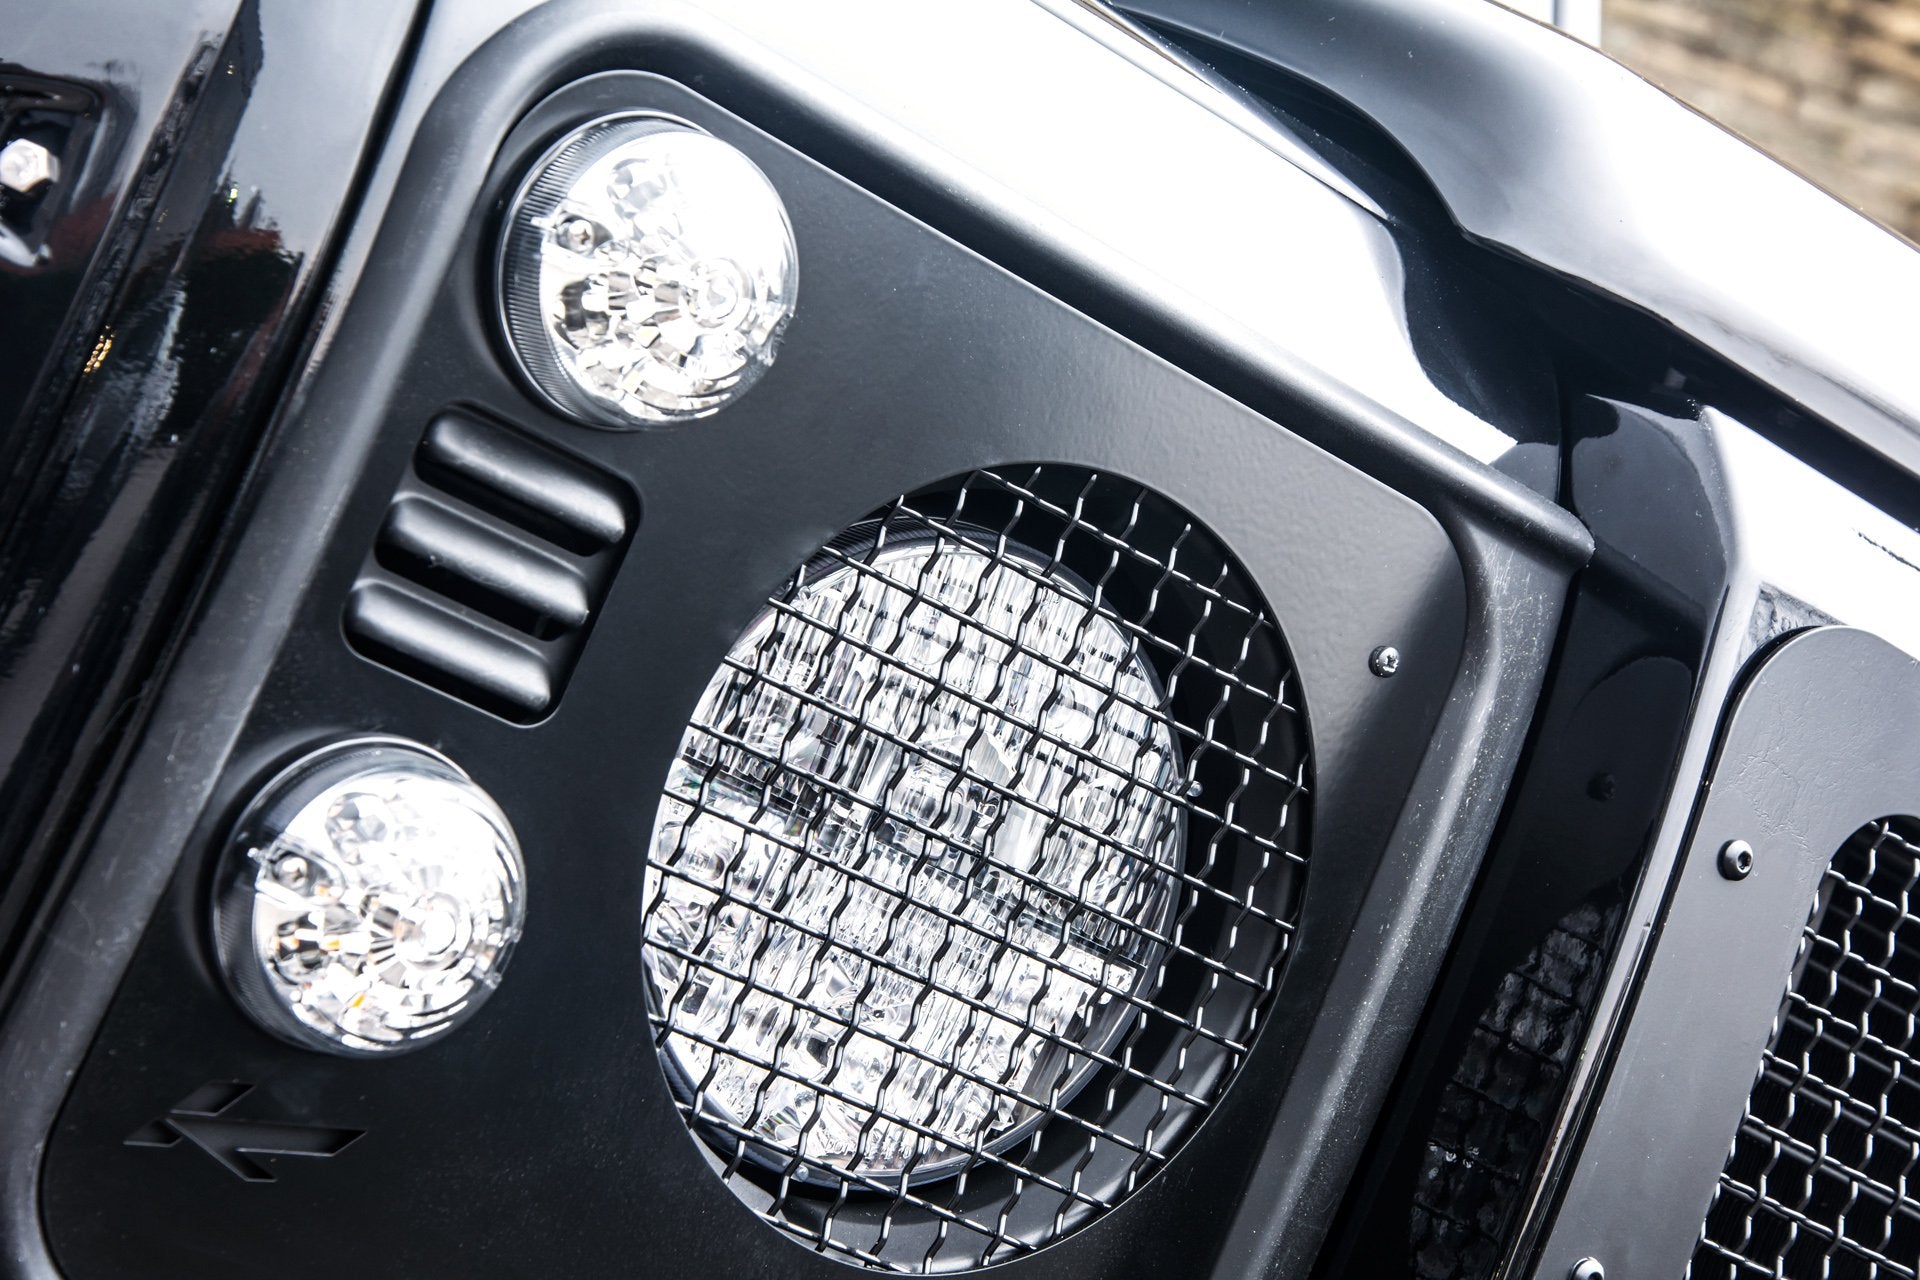 Land Rover Defender (1991-2016) Headlight Covers With Mesh Image 5075